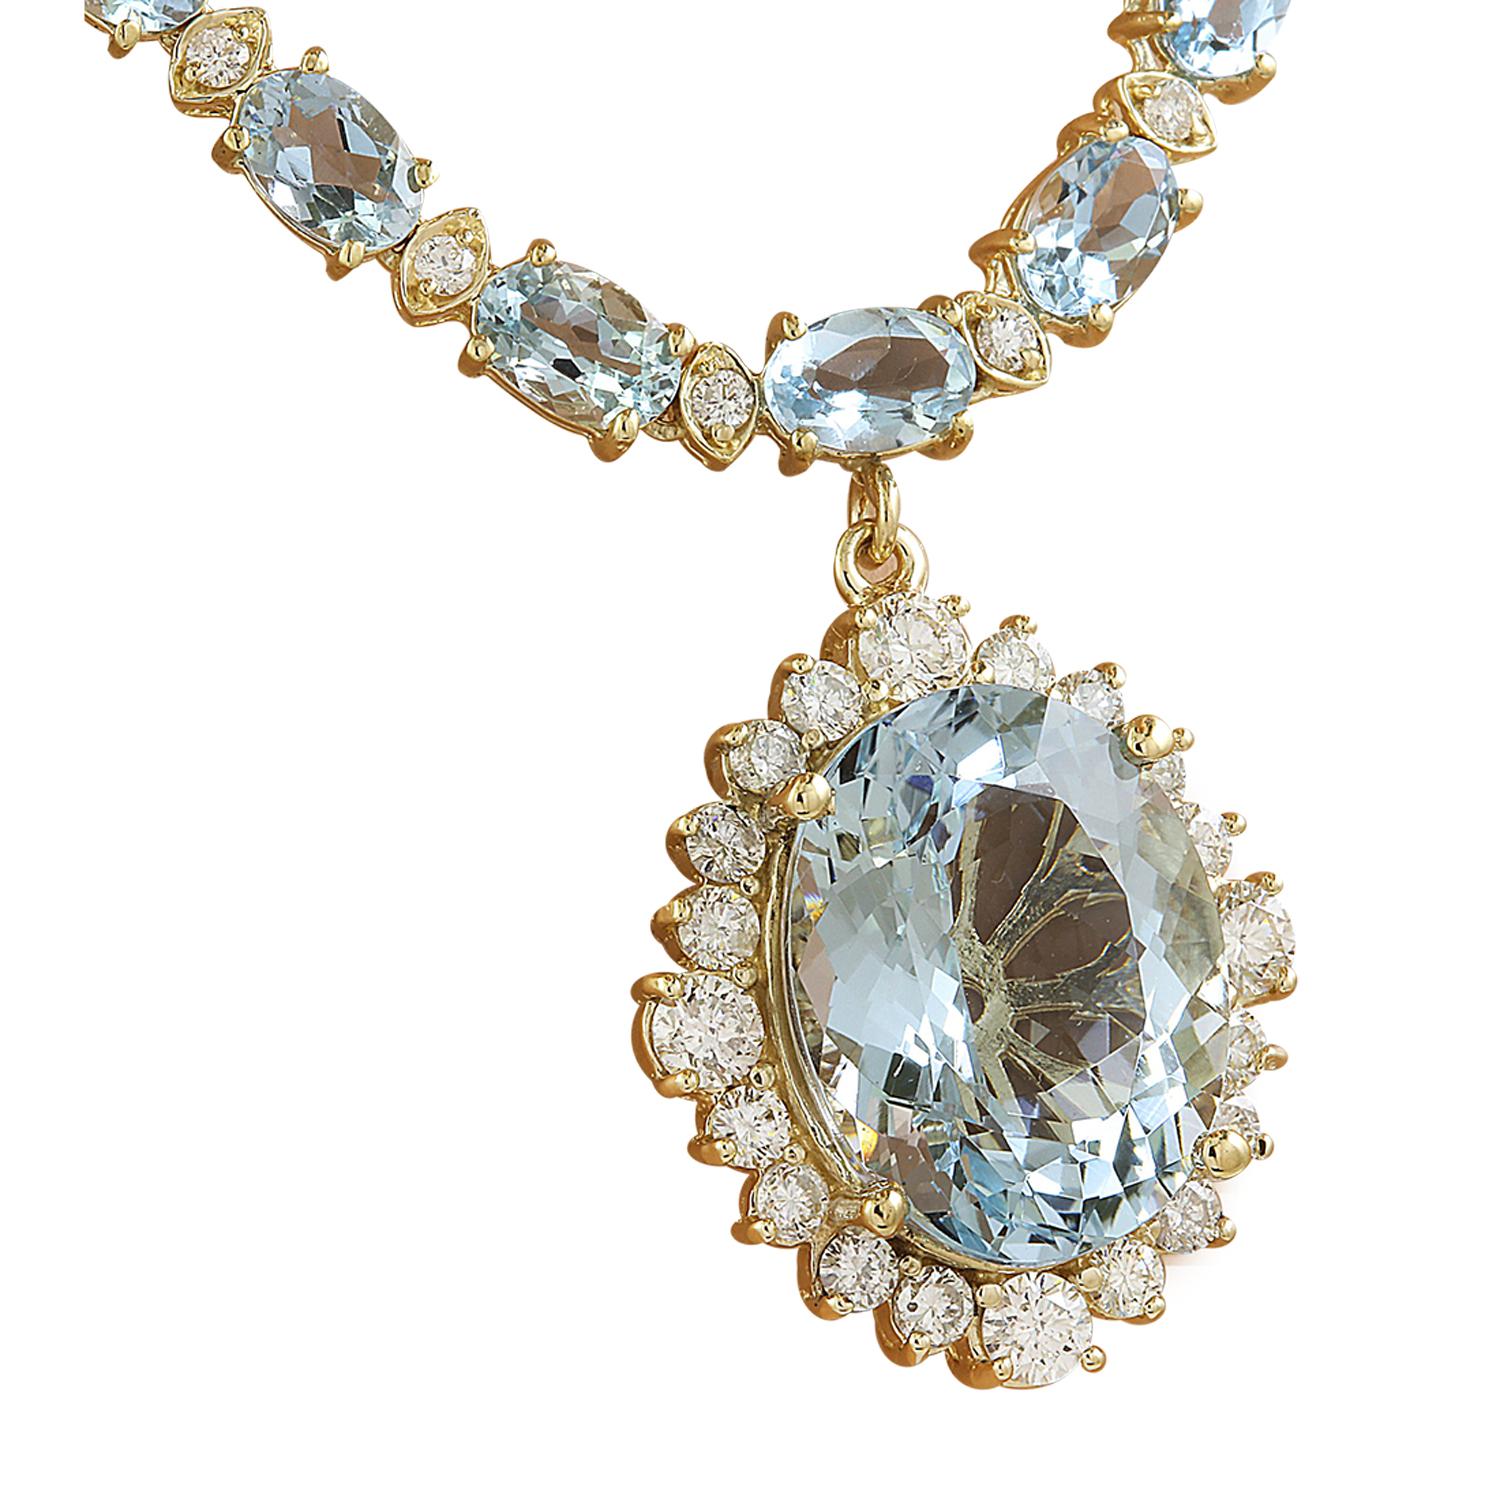 41.26 Carat Natural Aquamarine 14 Karat Solid Yellow Gold Diamond Necklace
Stamped: 14K
Total Necklace Weight: 30.9 Grams
Necklace Length: 19 Inches
Center Aquamarine Weight: 10.66 Carat (16.00x2.00 Millimeters)
Side Aquamarine Weight 28.00 Carat